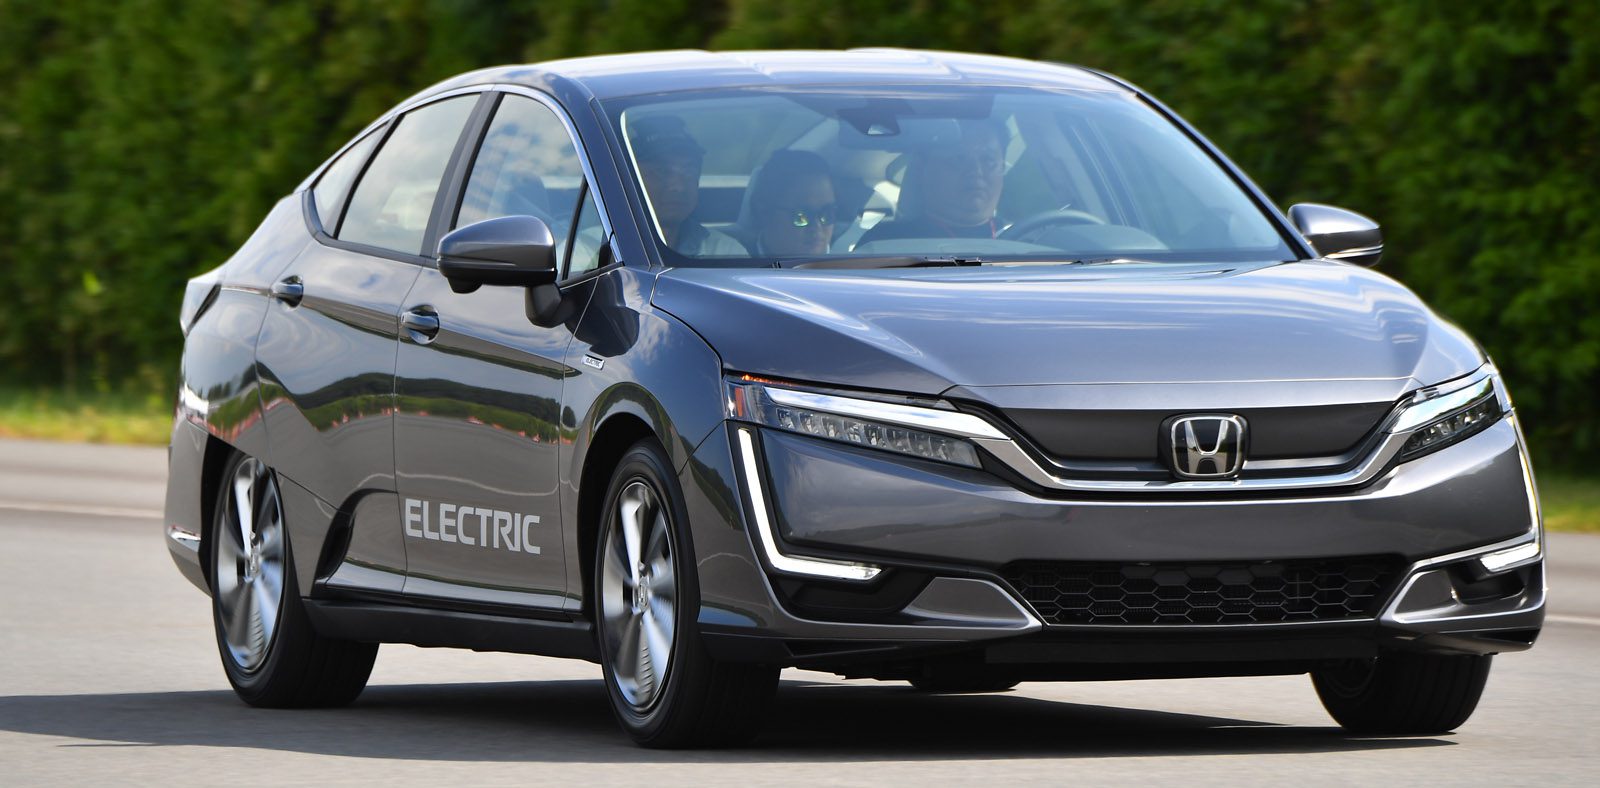 Honda will unveil a new allelectric vehicle this autumn Electrek